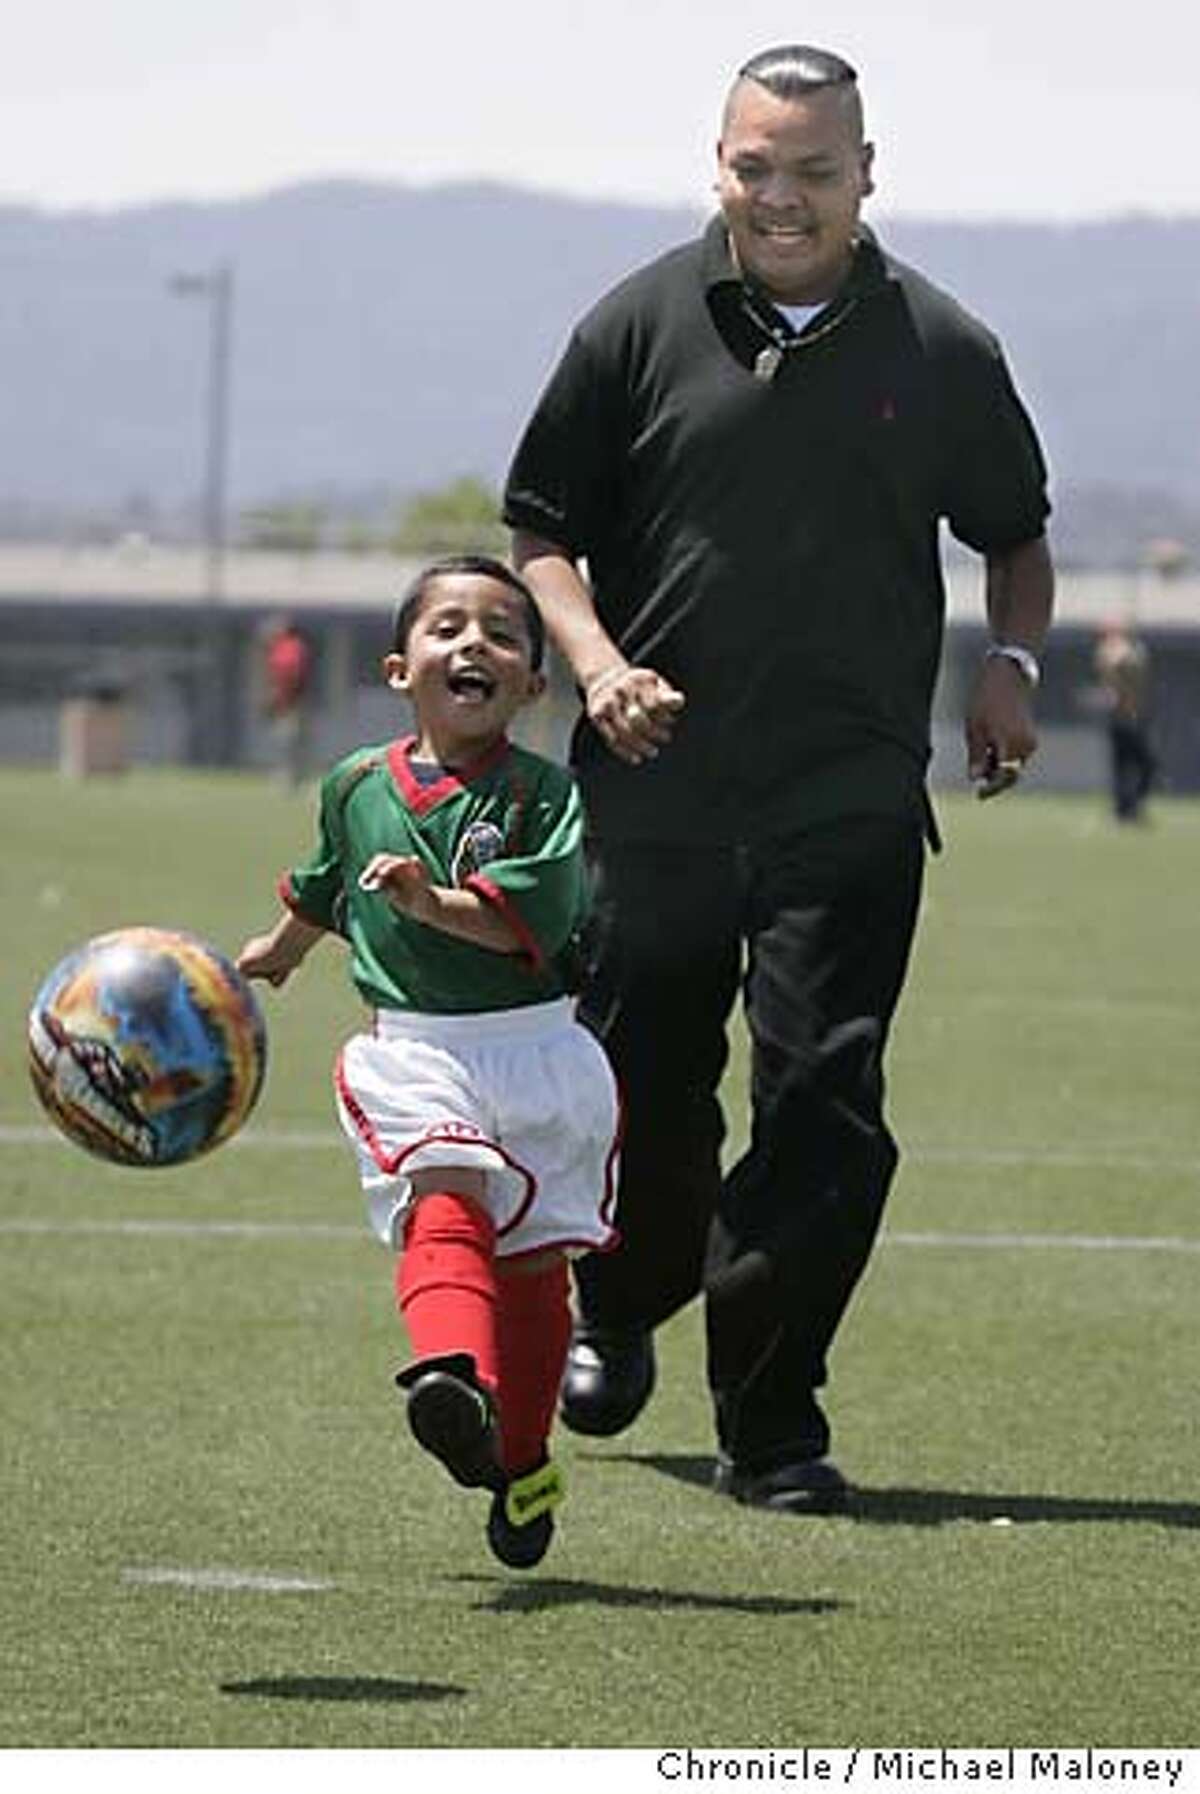 Three year old Osvaldo (cq) Garcia and his dad Juan Garcia practice soccer at the Hoover School soccer field in Redwood City. "Little Michoacan" in Redwood City, part of the unincorporated North Fair Oaks neighborhood is 90 percent Latino. The modest homes, sandwiched among neighboring apartments and duplexes, have a distinct Latino flavor. Photo by Michael Maloney / San Francisco Chronicle